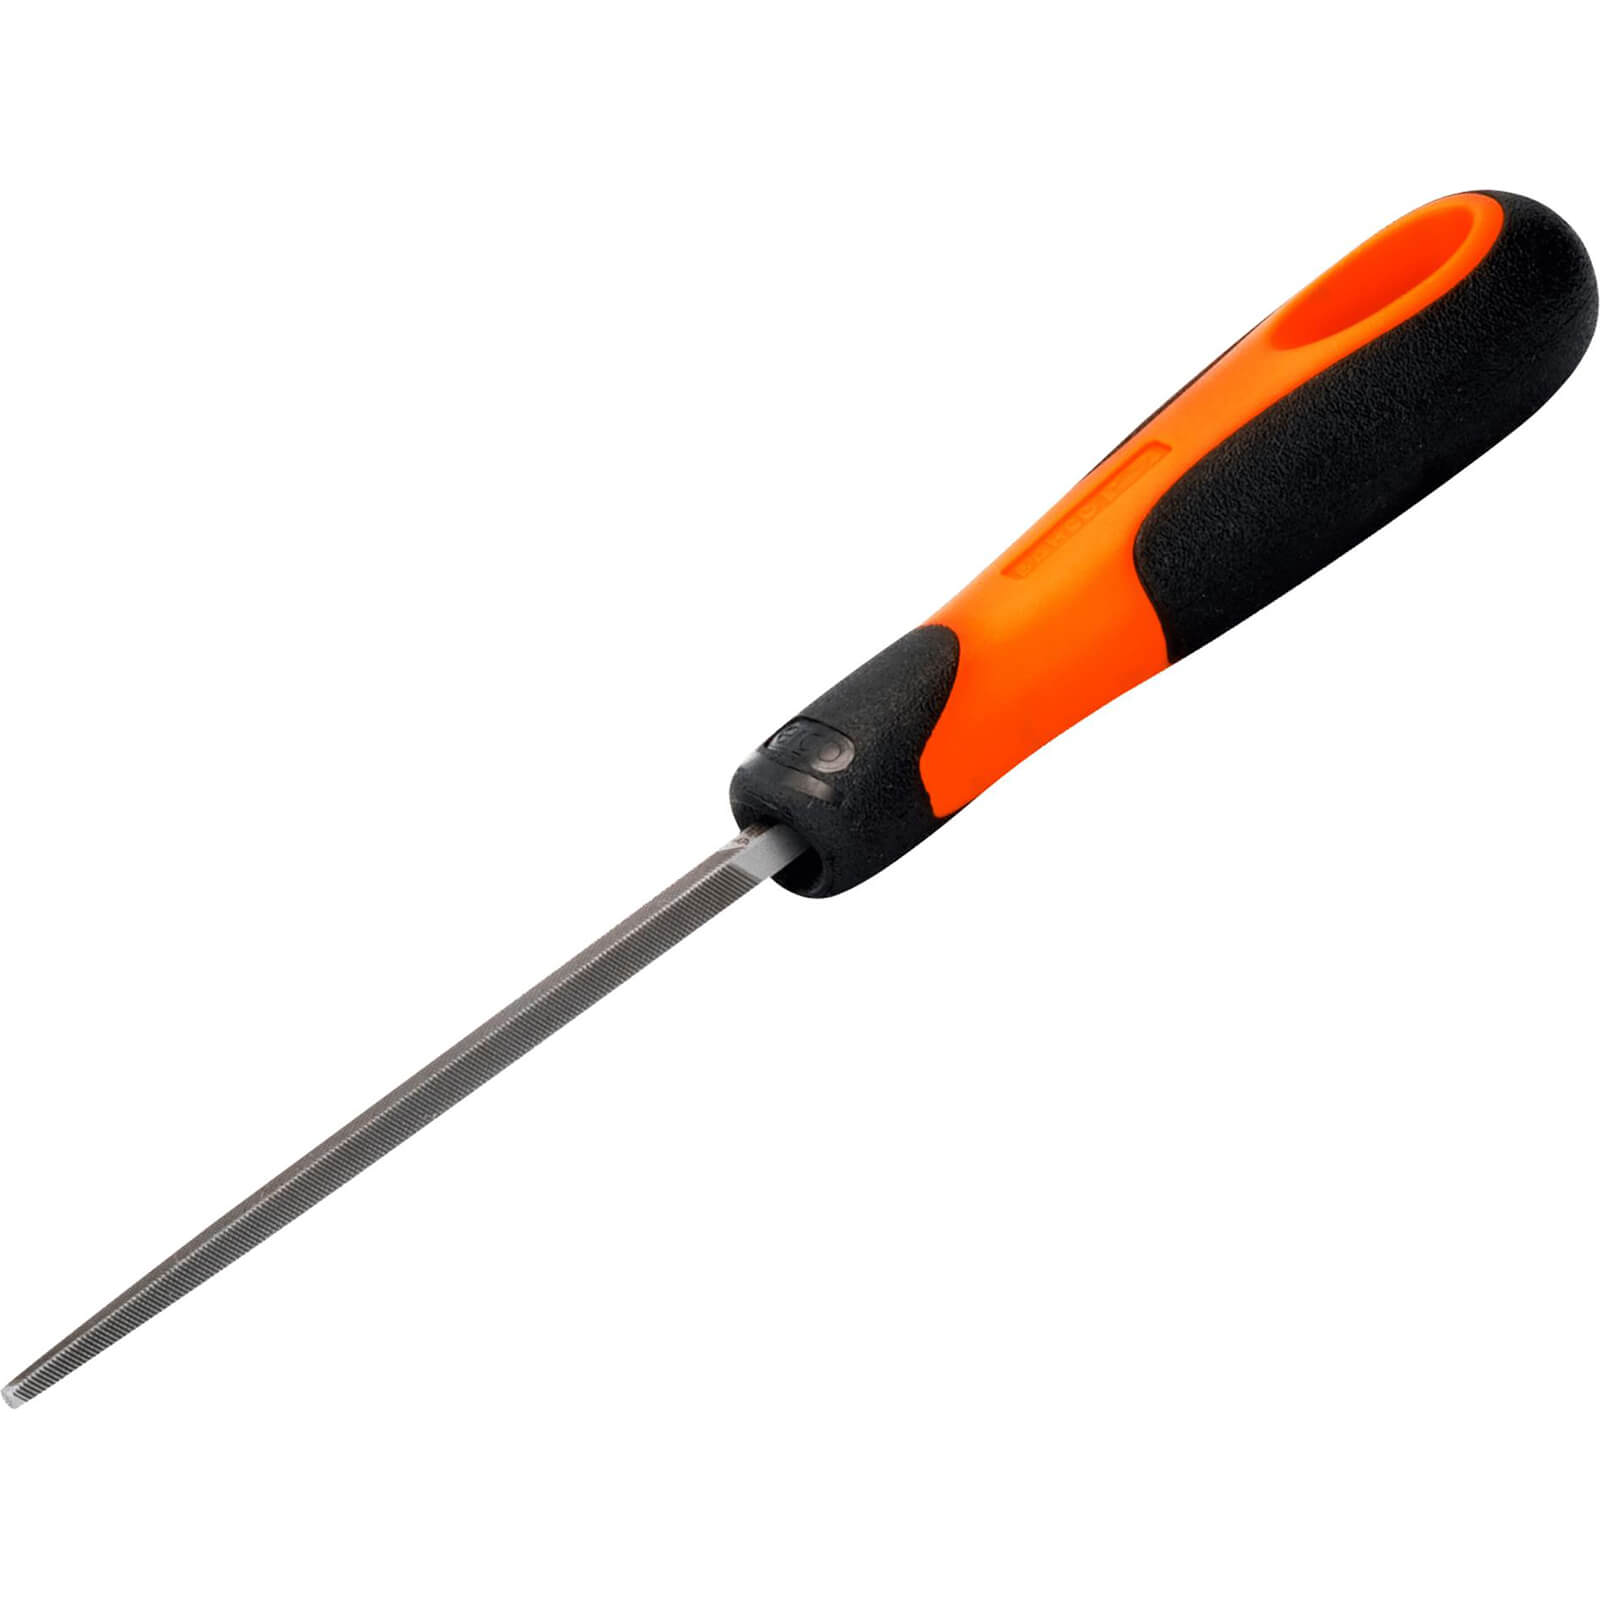 Bahco 150mm Second Cut Square File & Handle